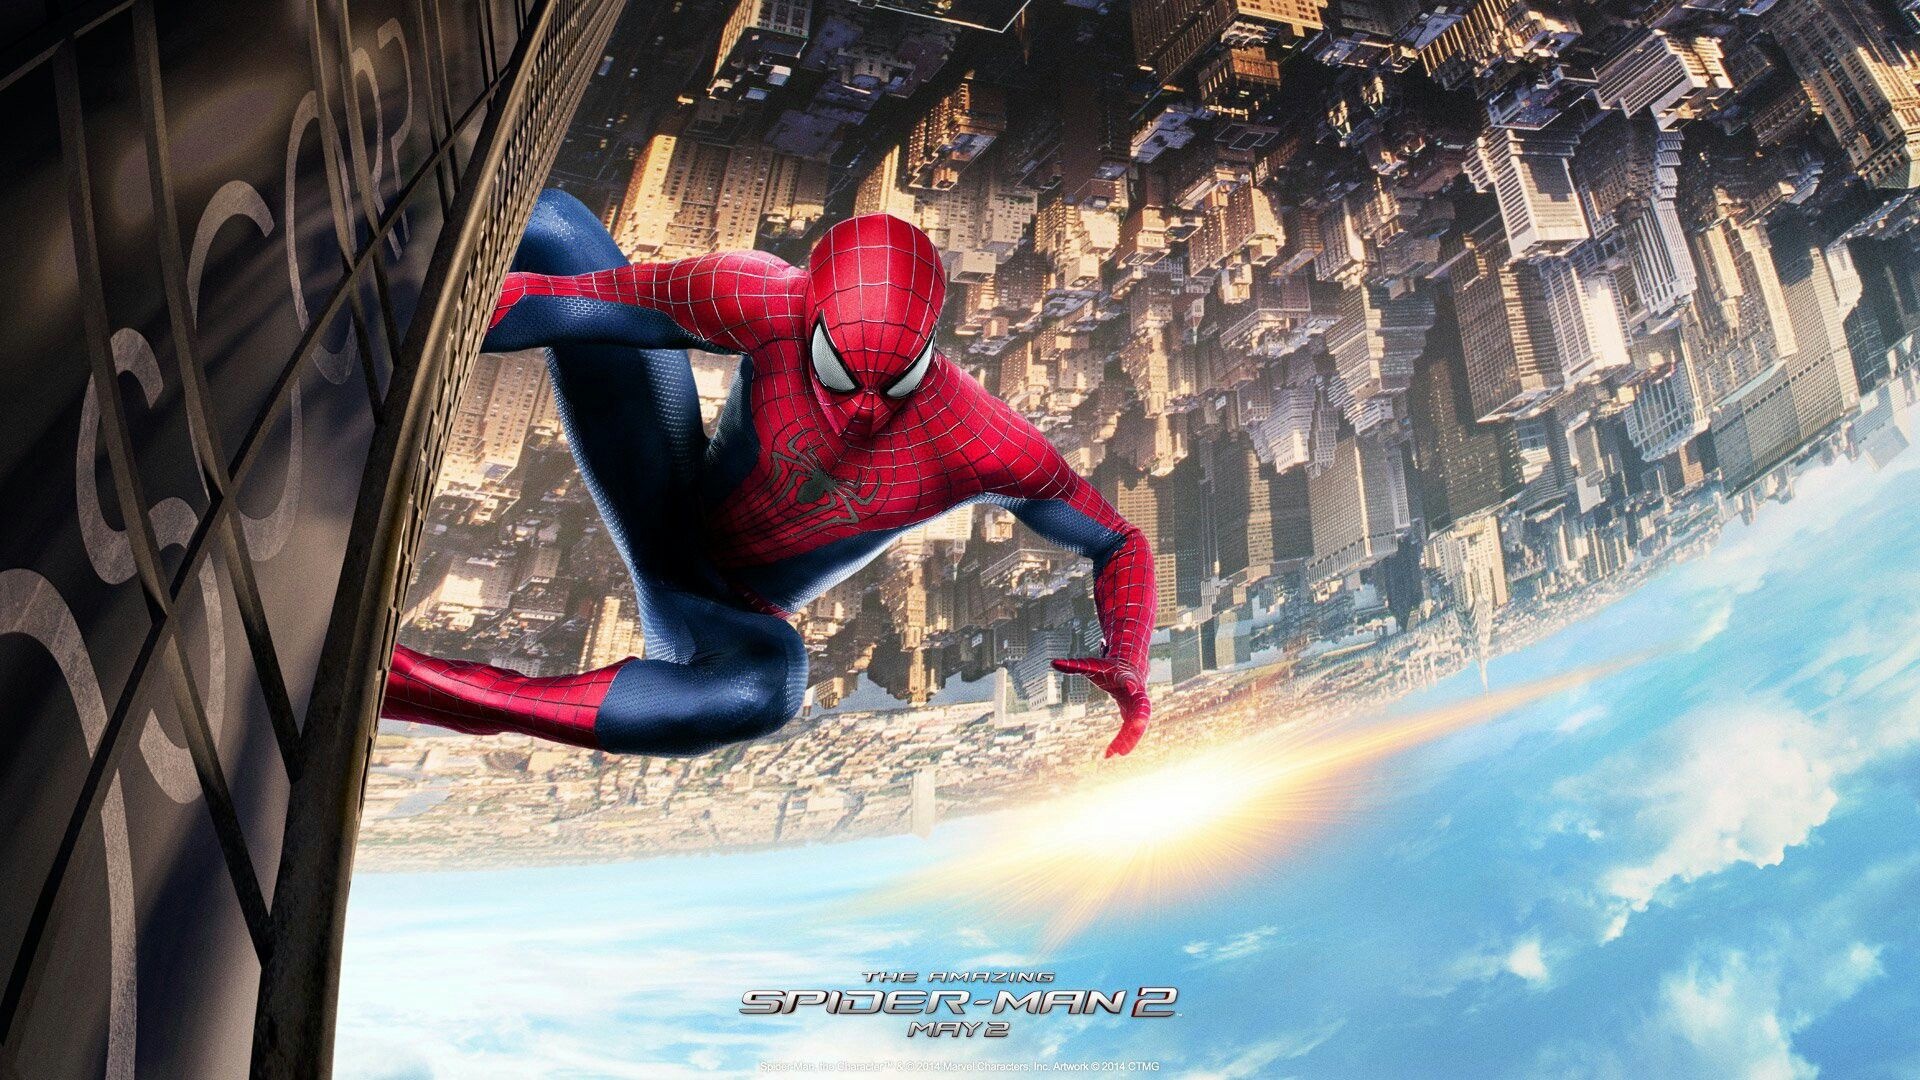 Columbia Pictures movies, The magnificent spider man, Phone wallpaper, Moviemania, 1920x1080 Full HD Desktop